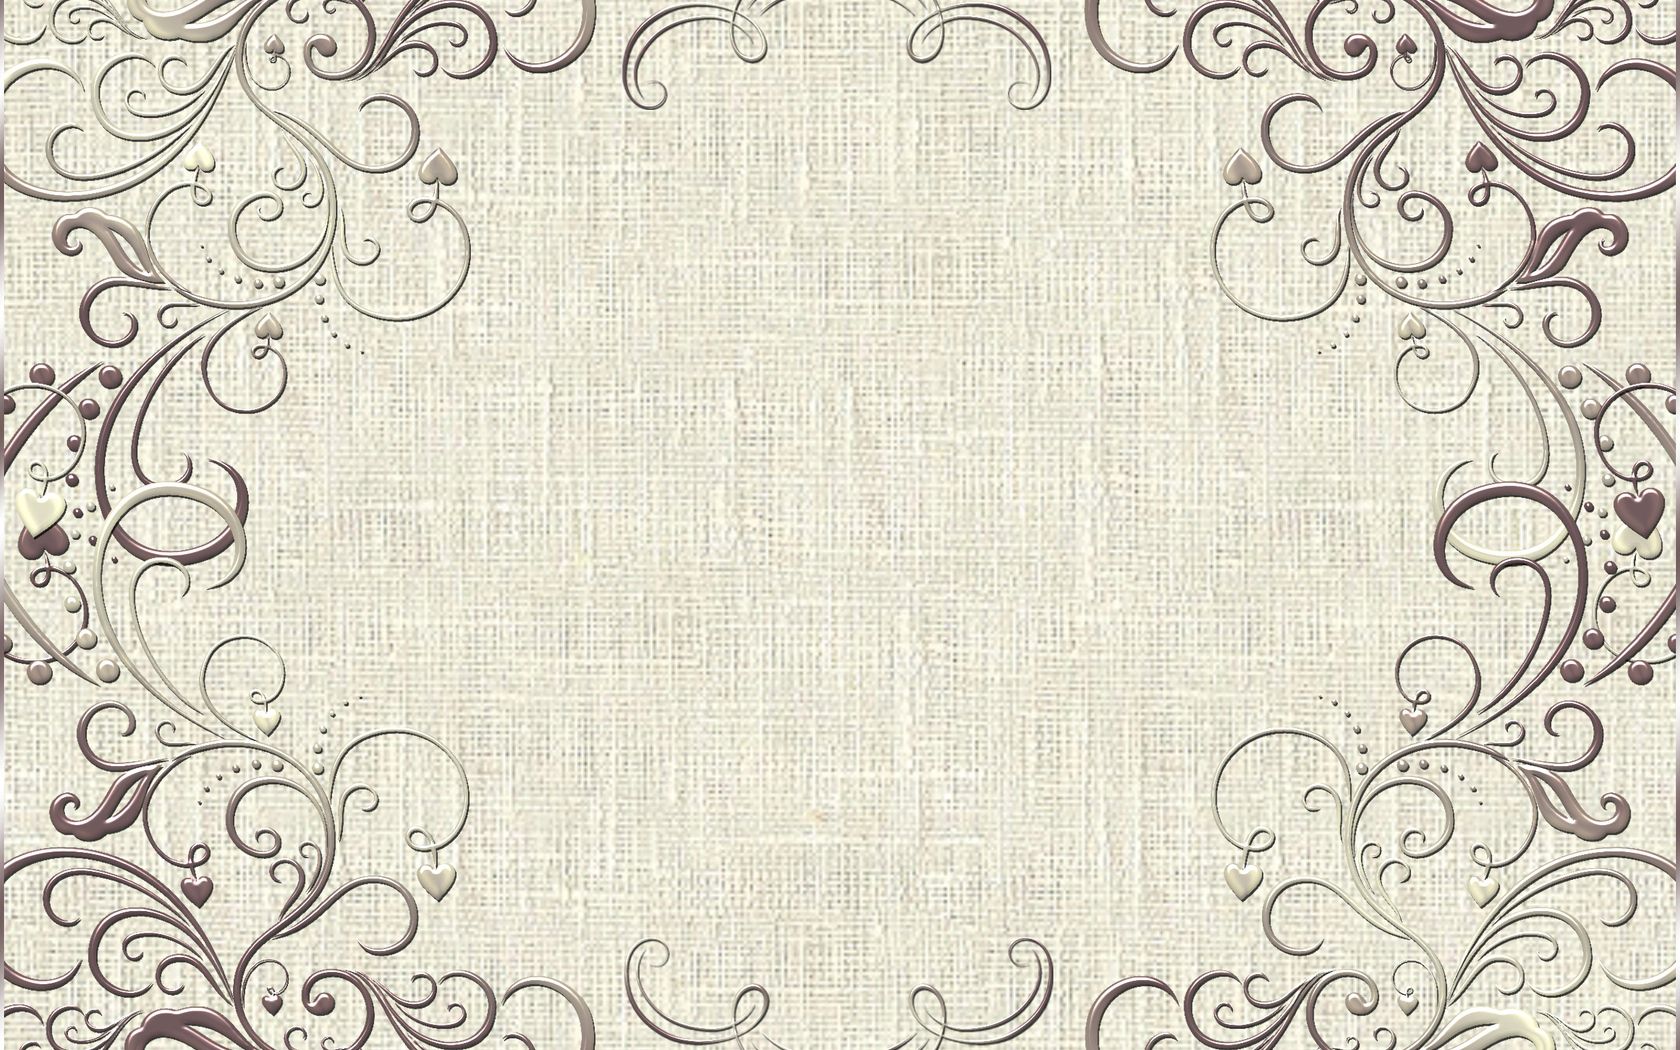 Wallpaper Full HD frame, background, patterns, texture, textures, cloth, vintage